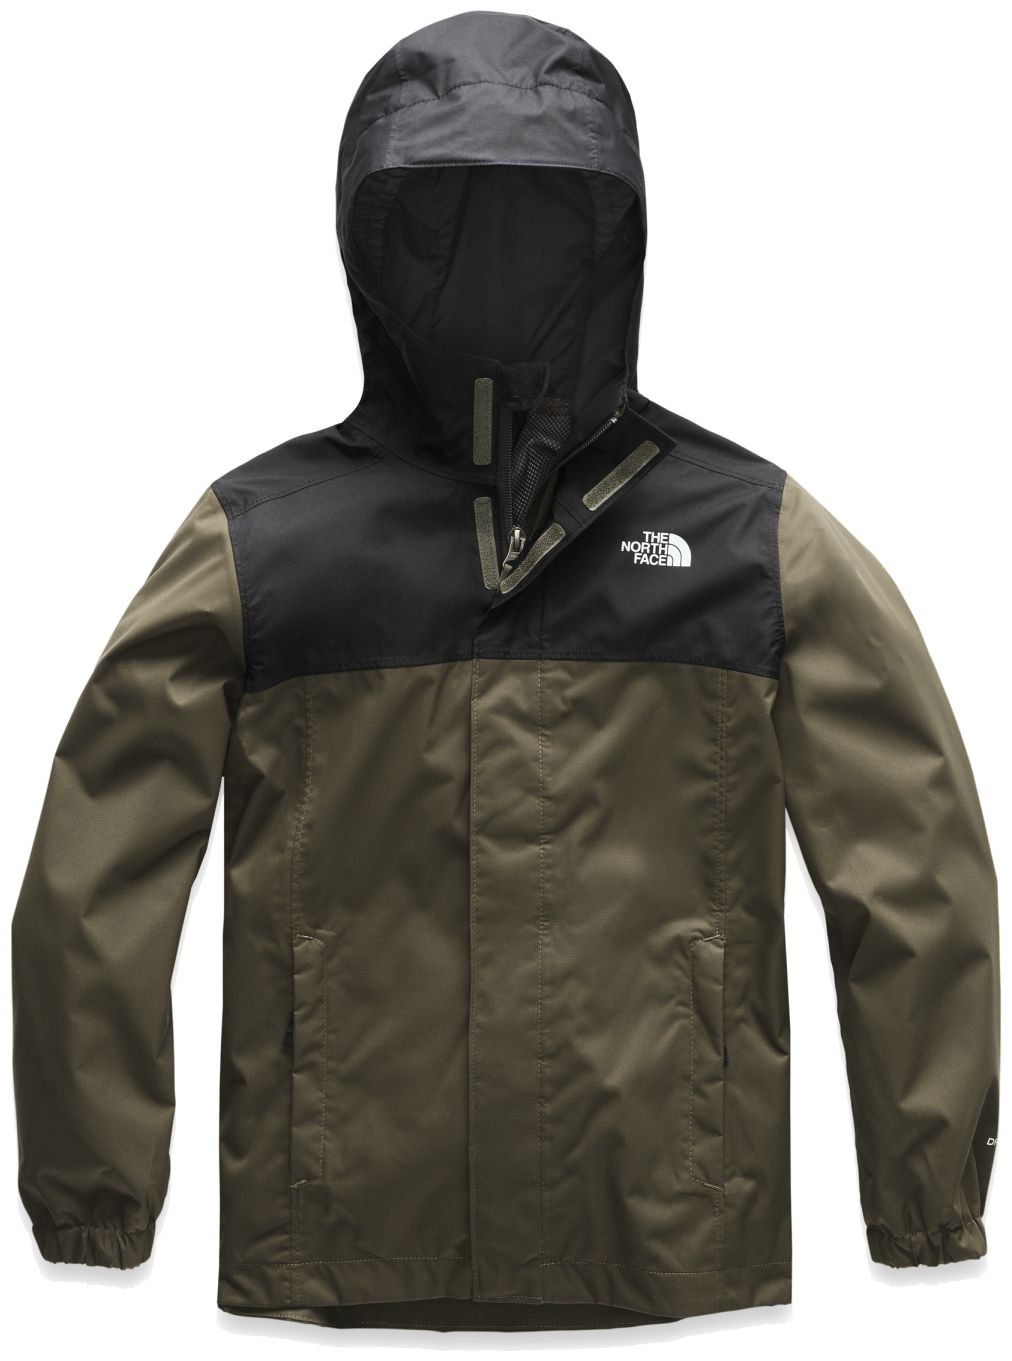 The North Face Boys Resolve Reflective Jacket - Kid's - Gear Coop